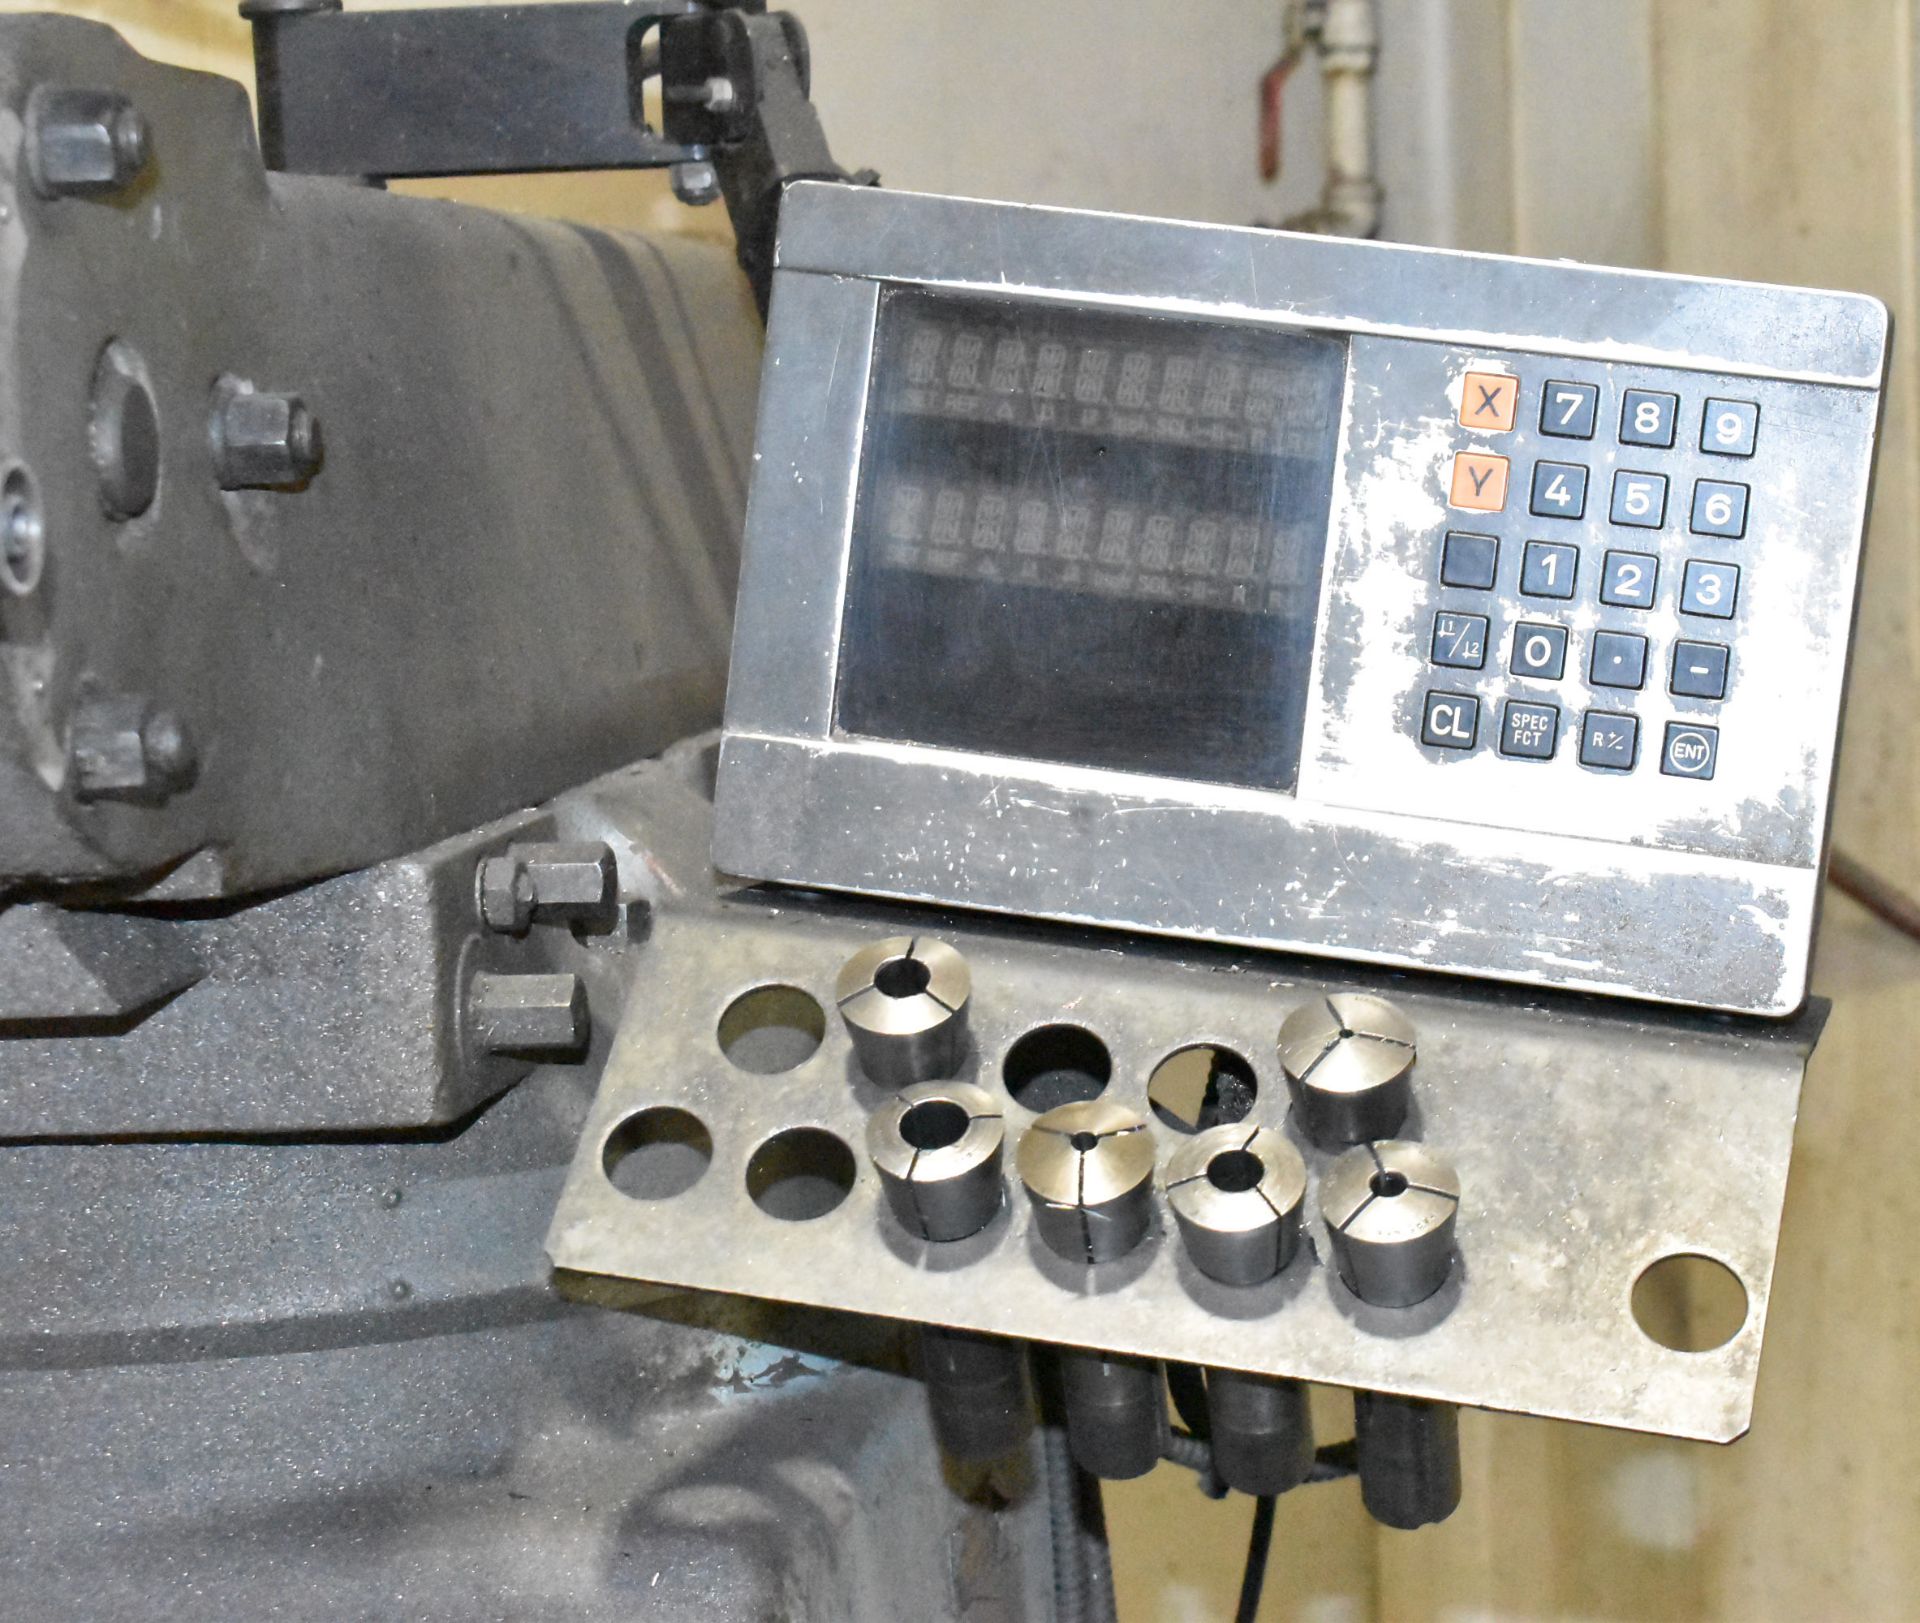 FIRST LC-185VS VERTICAL MILLING MACHINES WITH 50"X10" TABLE, SPEEDS TO 4500 RPM, HEIDENHAIN 2-AXIS - Image 3 of 6